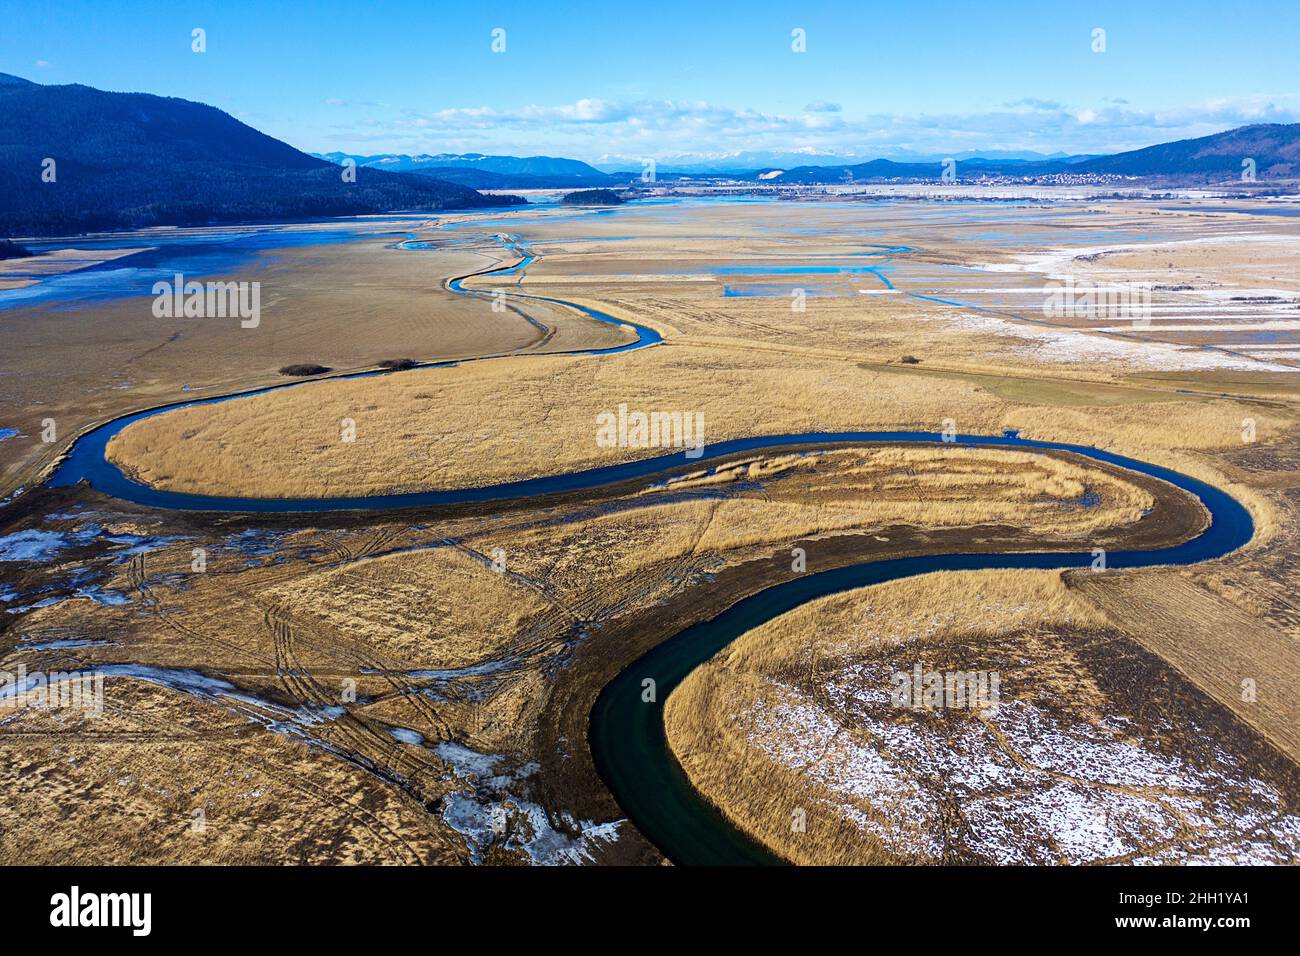 Top aerial view of tributary that flows into Cerknica Lake, beautiful view over the frozen intermittent lake and mountains, taken by drone, Slovenia Stock Photo